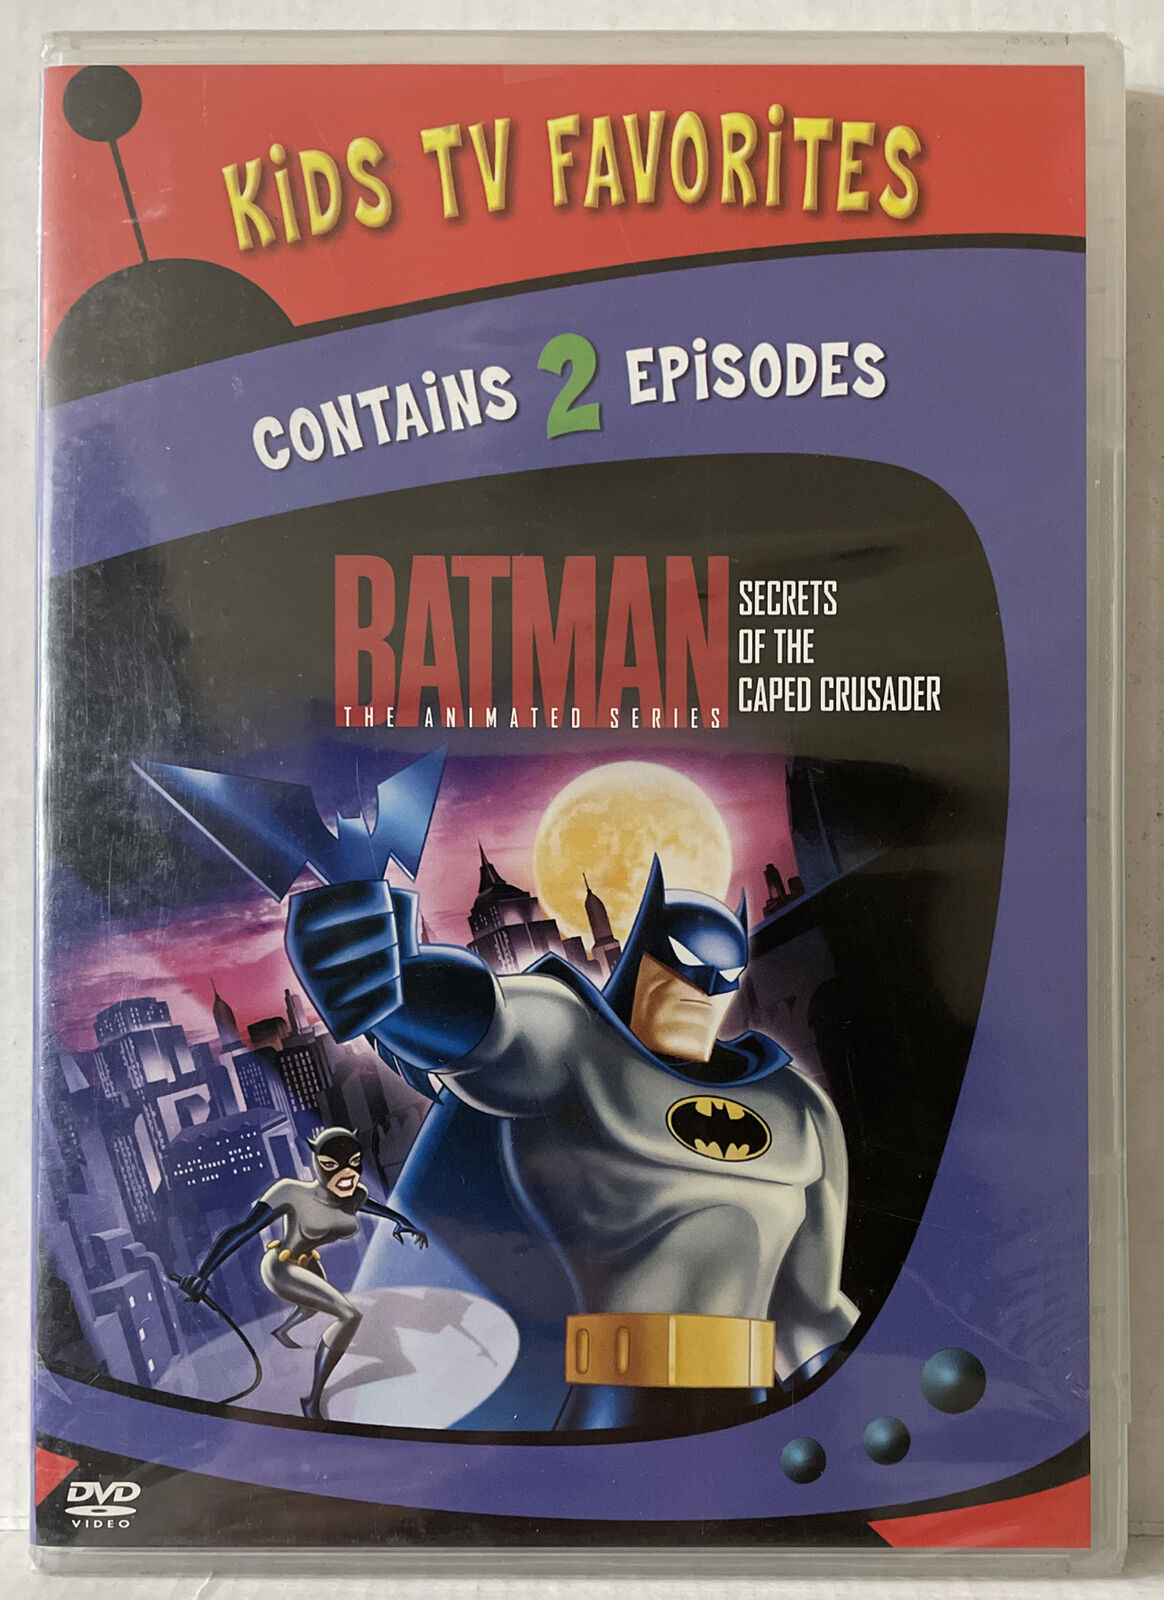 Batman: The Animated Series-Secrets of the Caped Crusader (New Dvd Episodes  1&2) 12569738591 | eBay